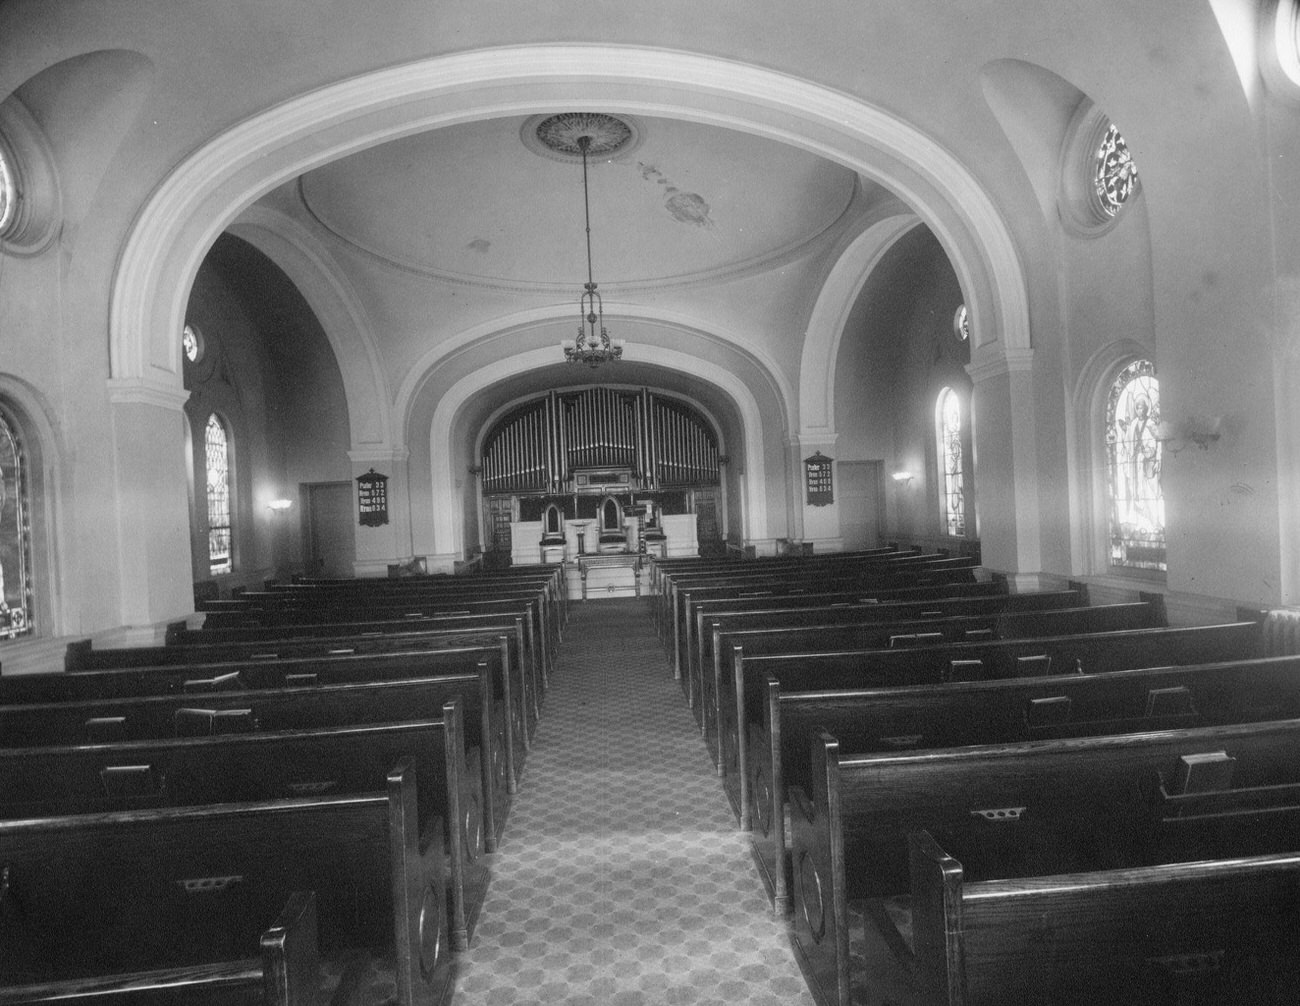 Interior Of Unidentified Church, Possibly At Flatbush And Church Avenues, Brooklyn, 1895